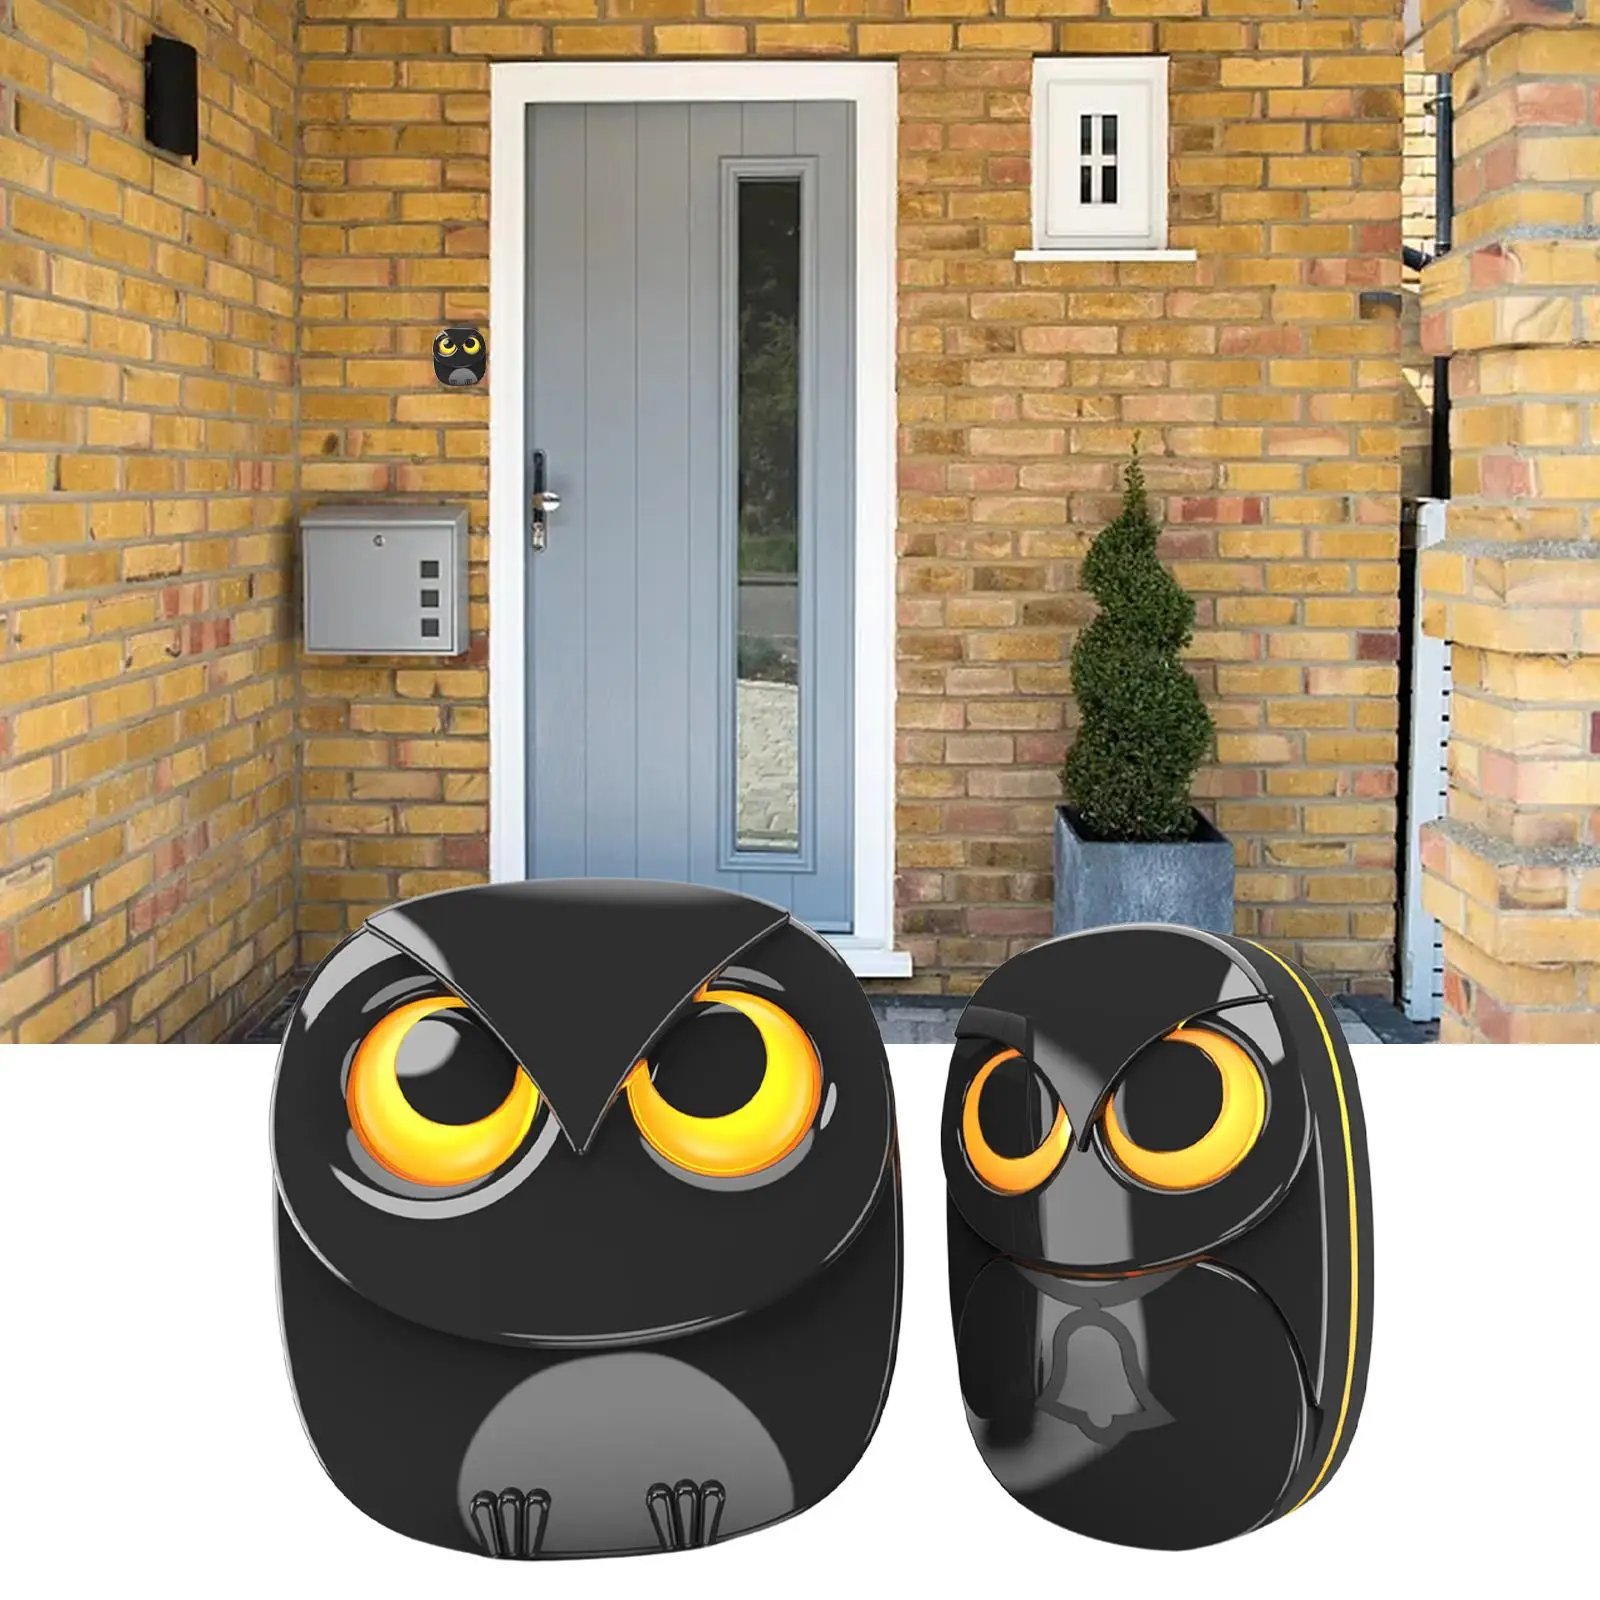 Wireless Driveway Security Alarm Cute Equipment Simple to Use Easy Installation Owl Shape for Front Porch Shed Gate Home EU Plug